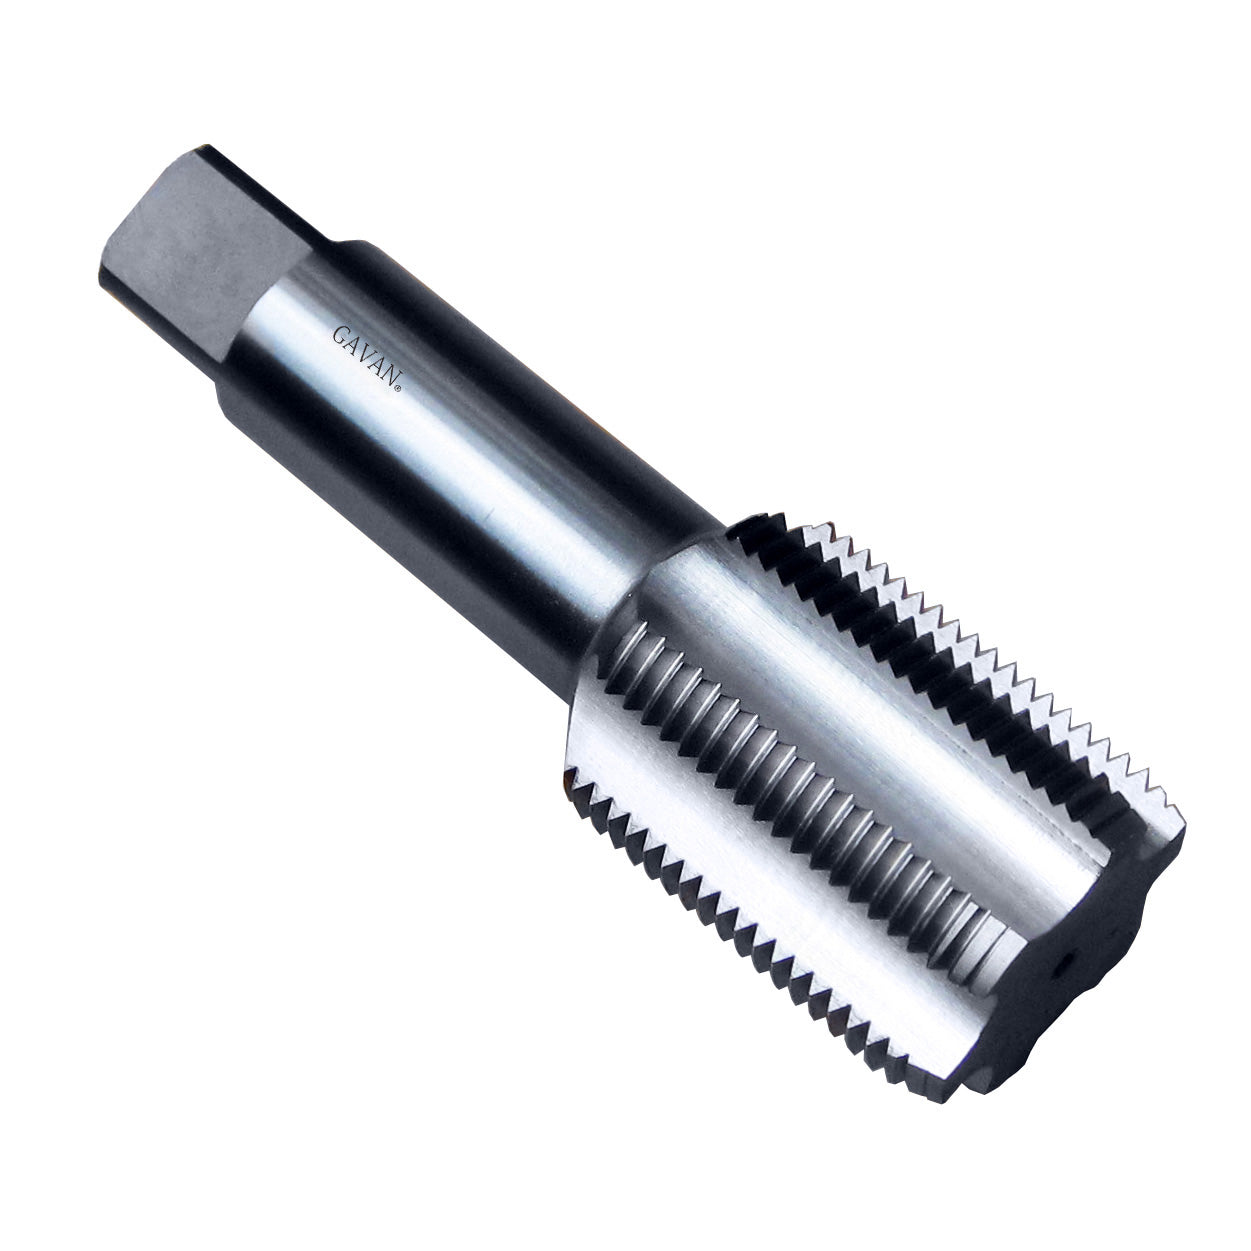 2 1/4" - 12 HSS Unified Right Hand Thread Tap